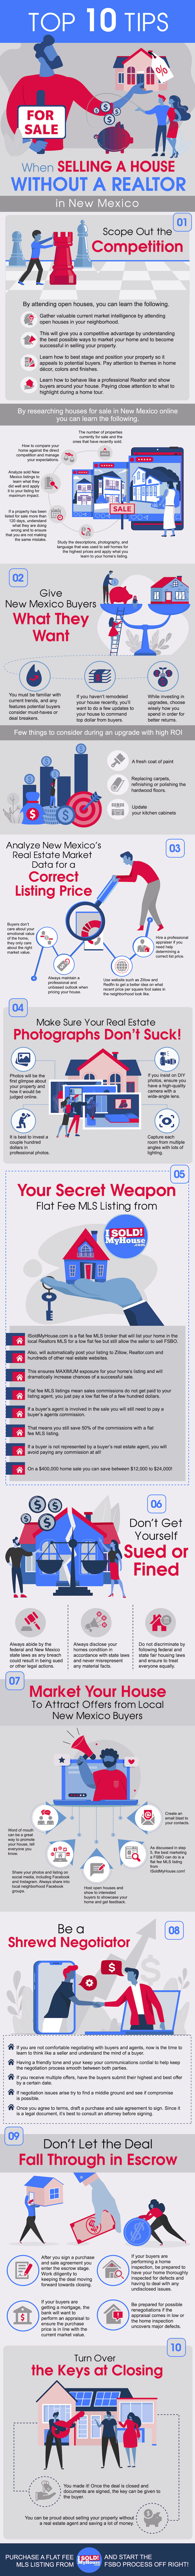 infographic of the 10 steps to sell a house in new mexico without an agent